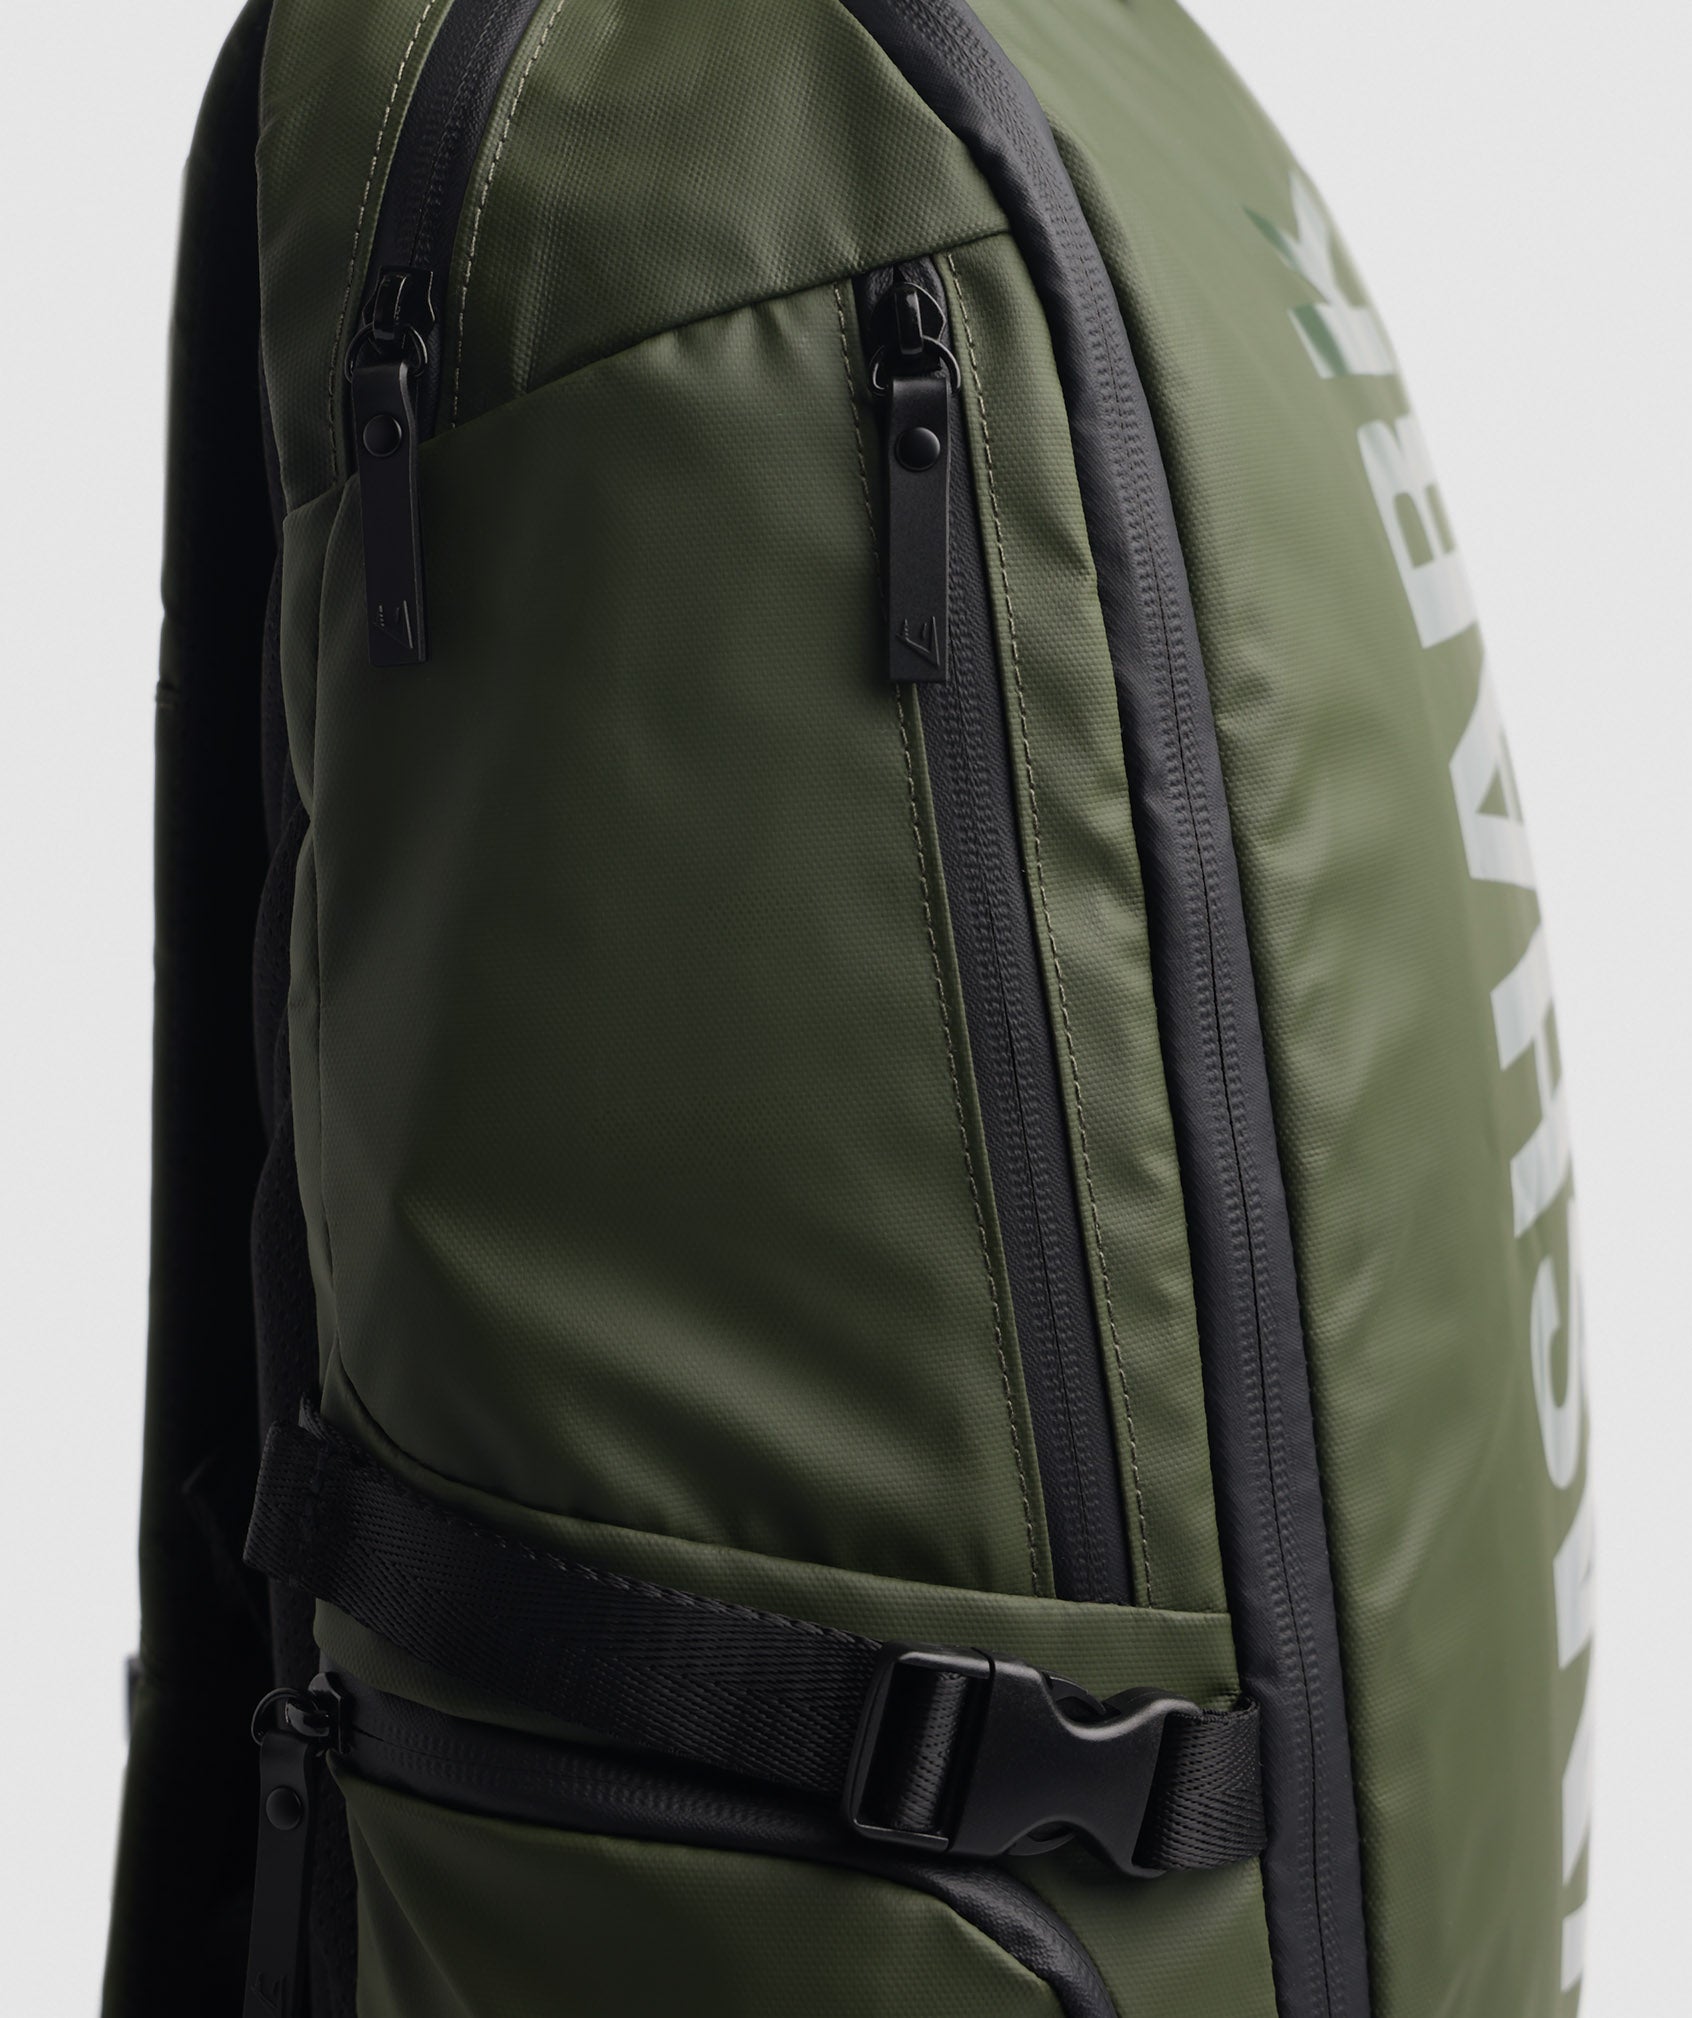 X-Series Bag 0.3 in Core Olive - view 3